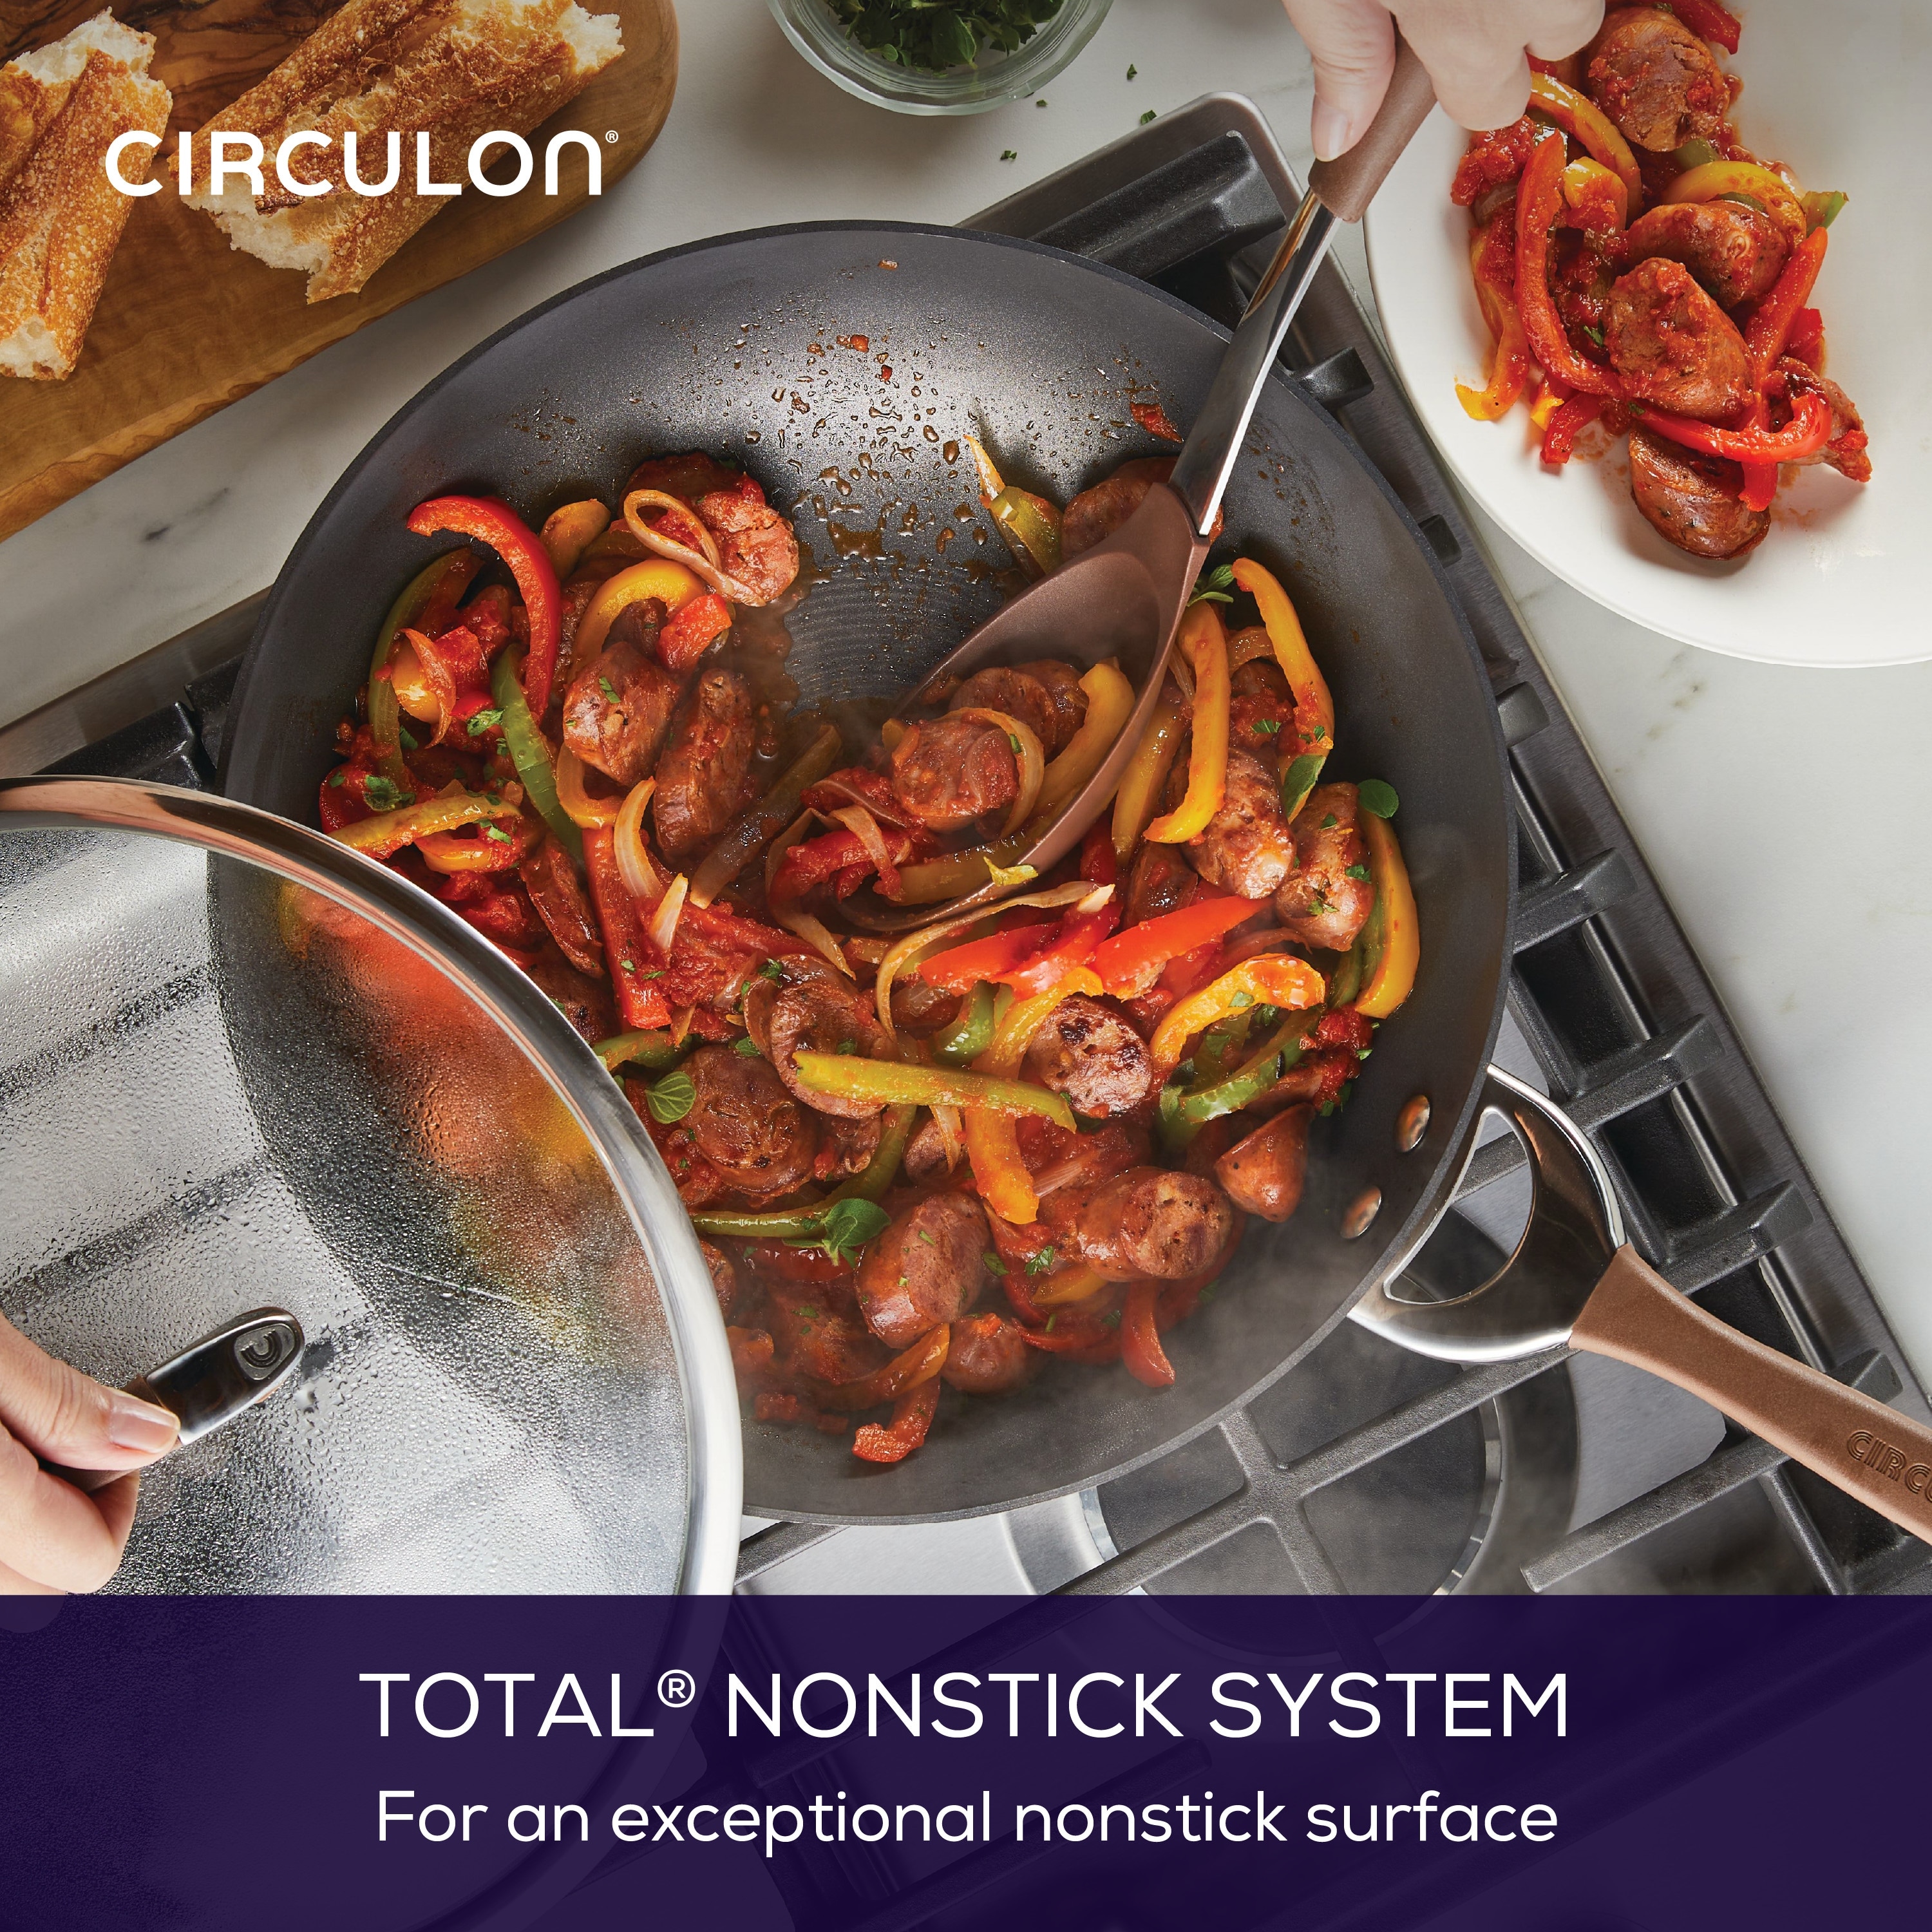 https://ak1.ostkcdn.com/images/products/is/images/direct/9d00fed3c27bb07465ae97f8bd231558a250305f/Circulon-Symmetry-Hard-Anodized-Nonstick-Induction-Chef-Pan-with-Lid%2C-12-Inch%2C-Chocolate.jpg